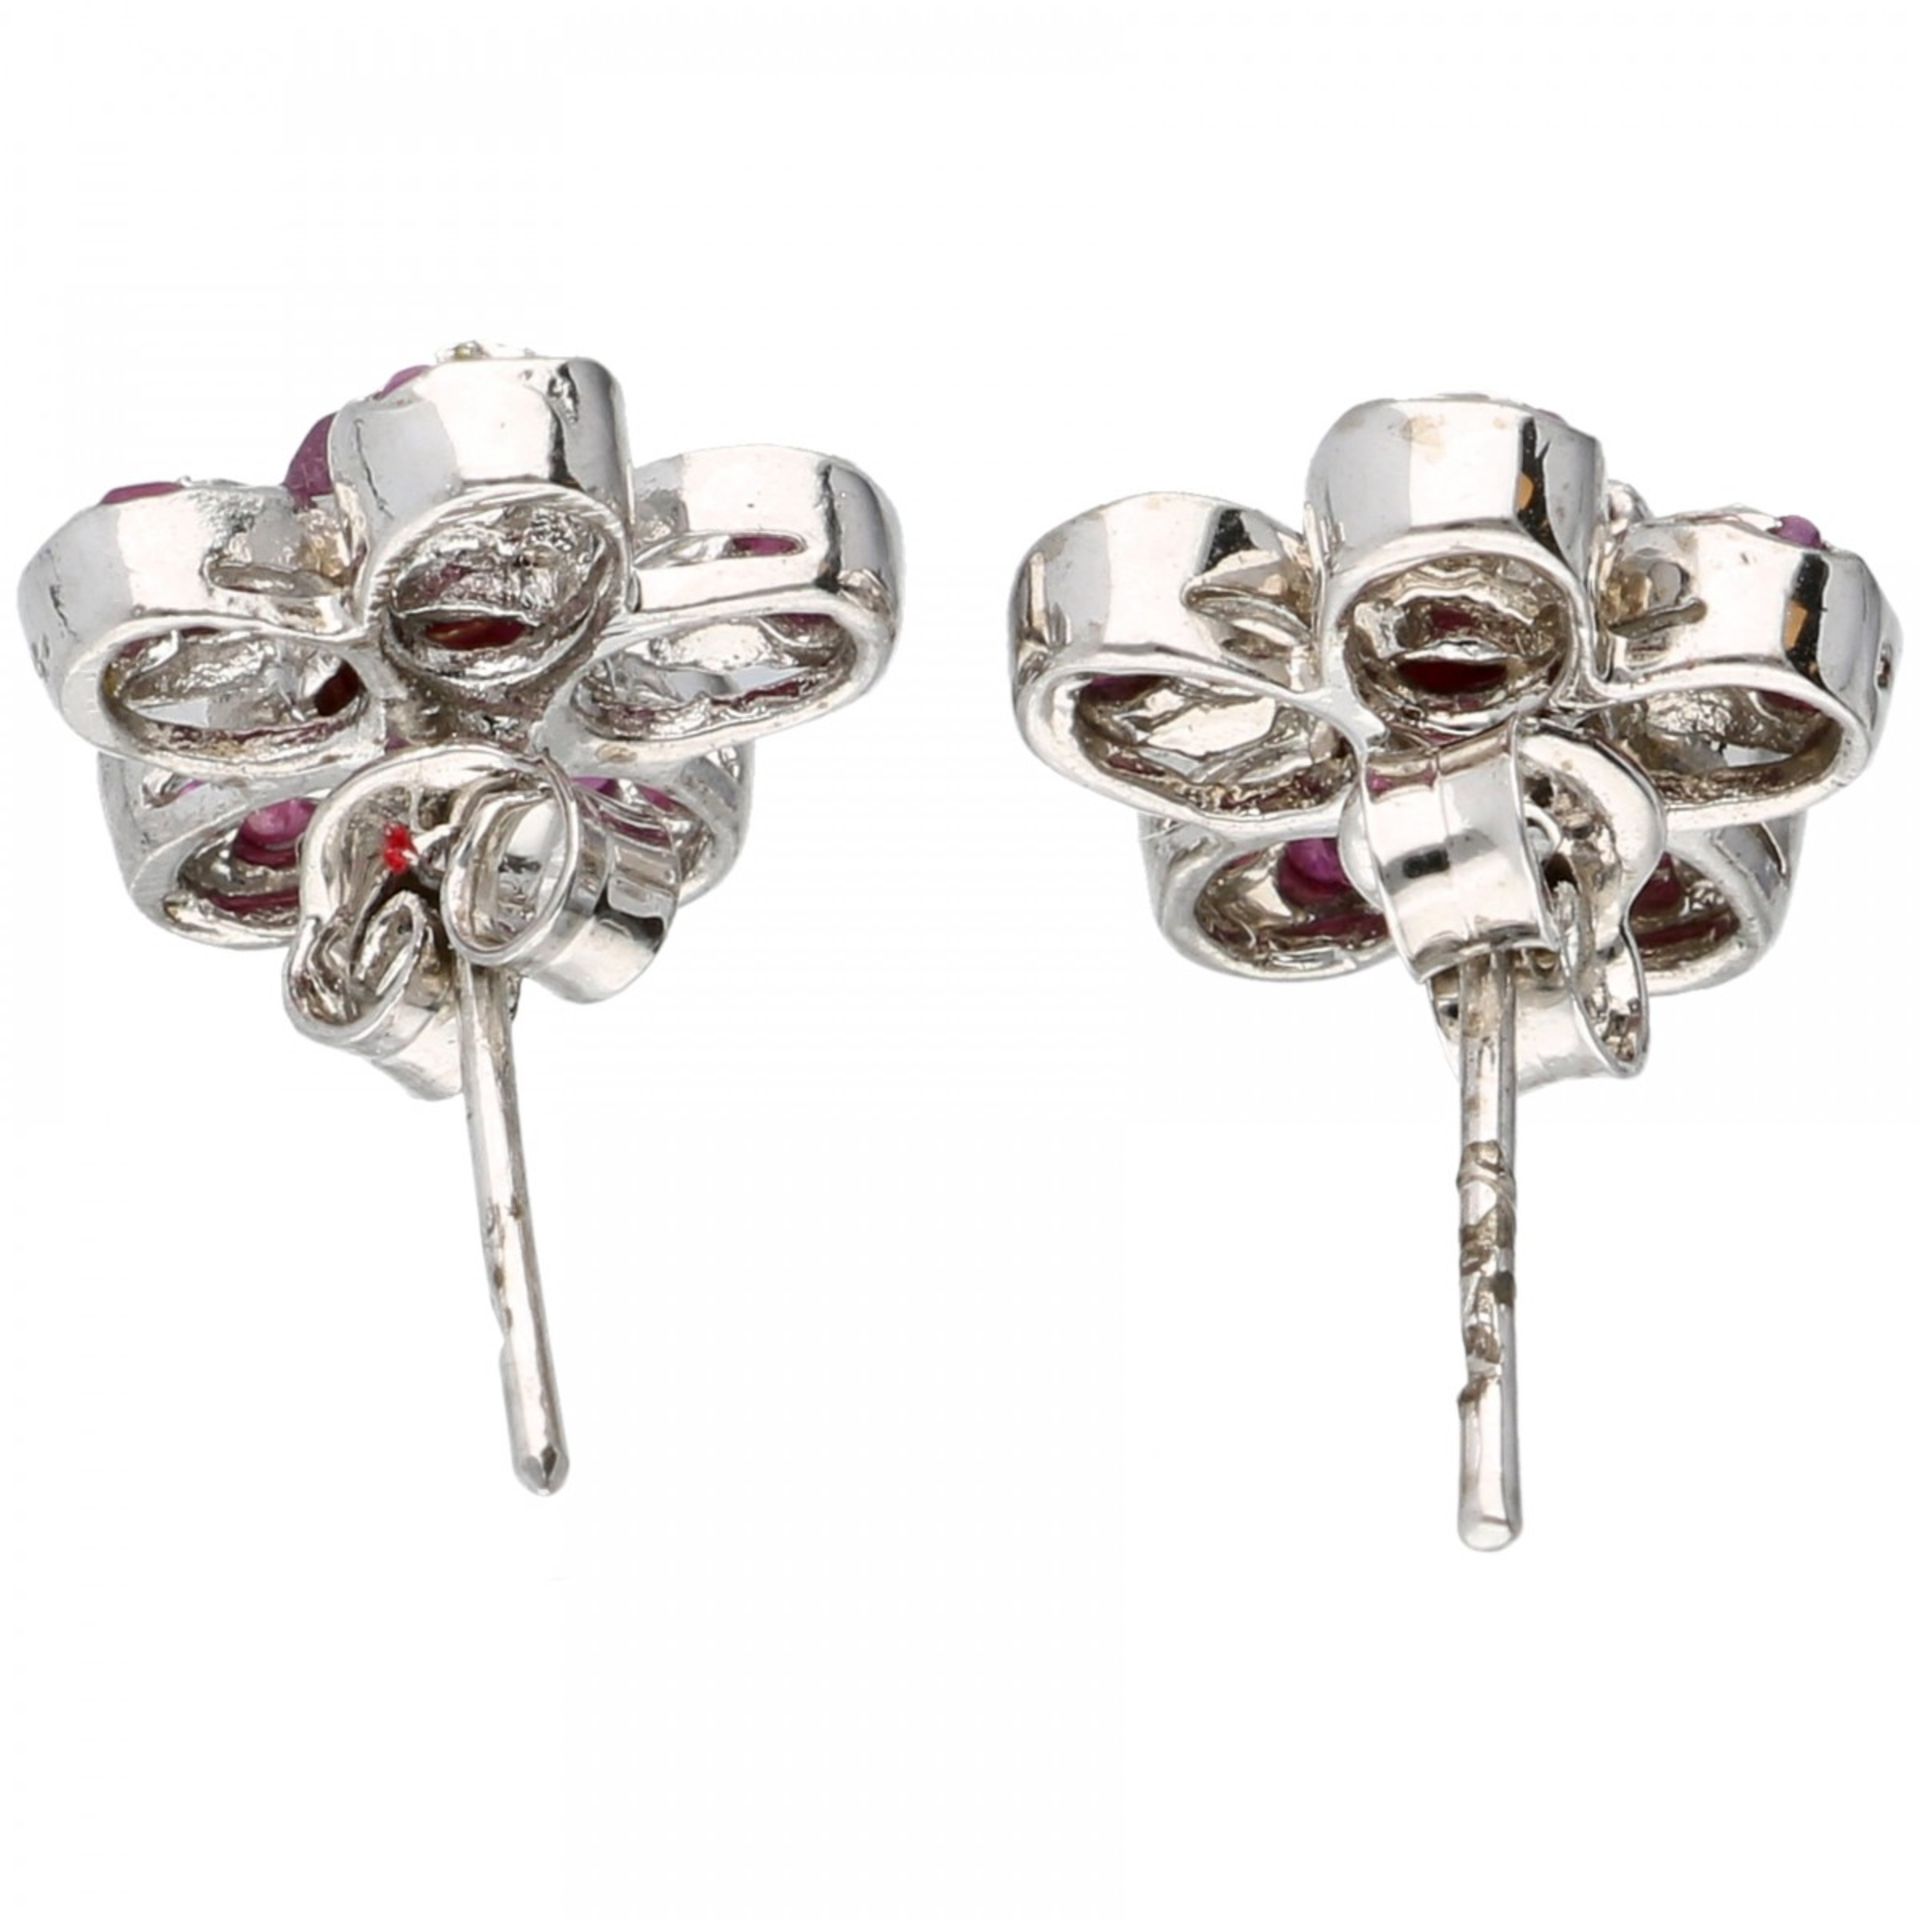 Silver flower-shaped earrings set with natural ruby - 925/1000. - Image 2 of 2